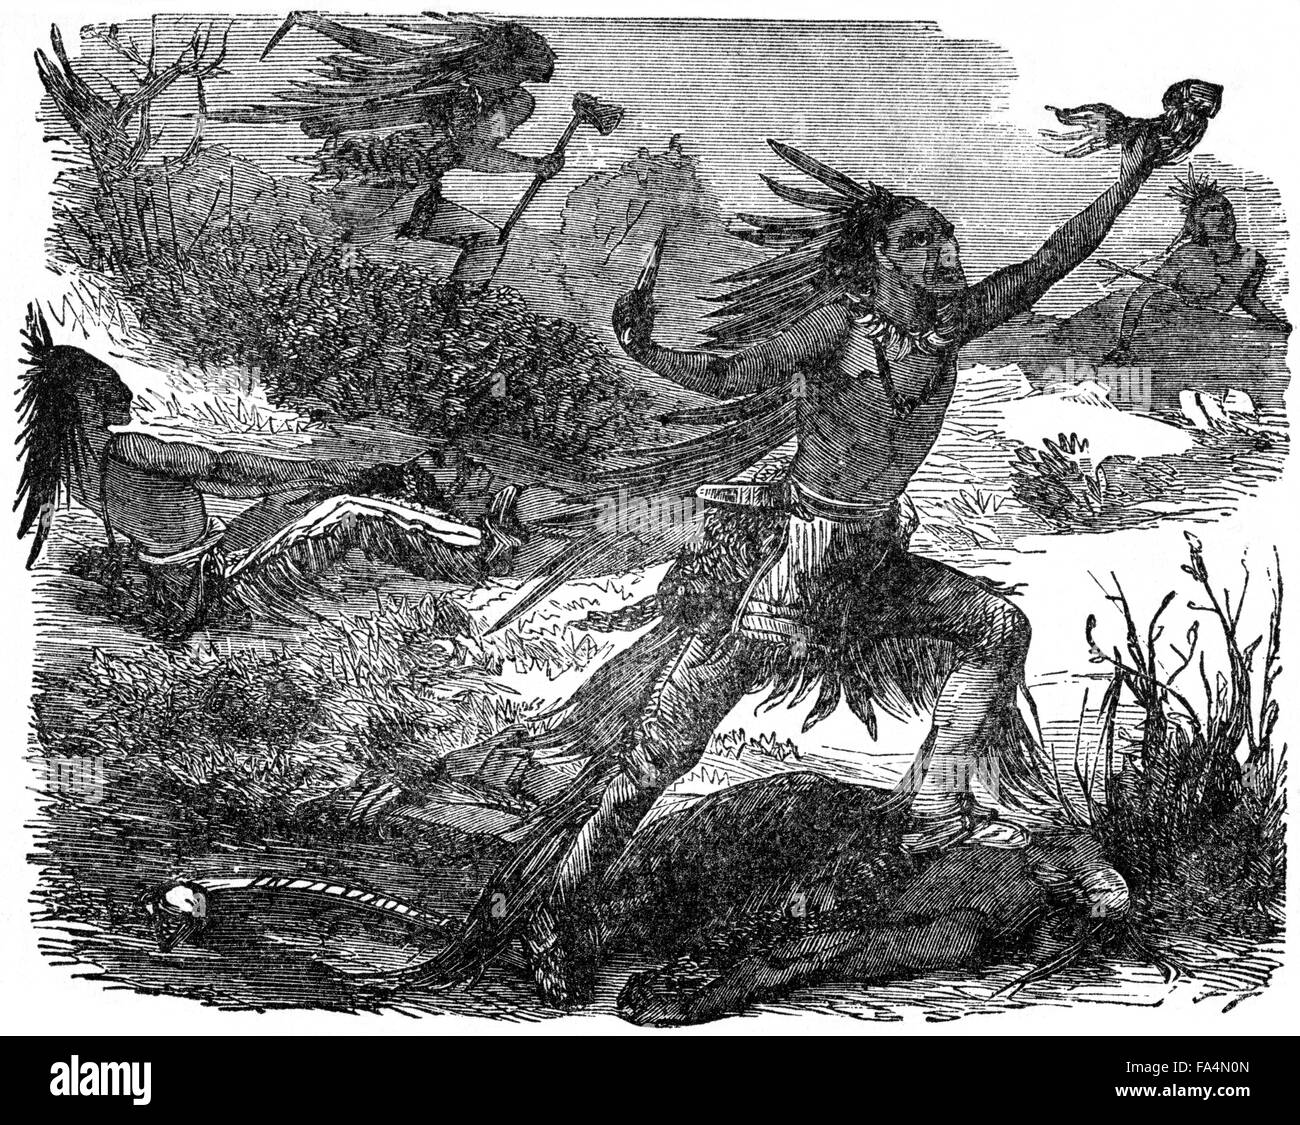 “Indians Scalping Their Victims”, Book Illustration from “Indian Horrors or Massacres of the Red Men”, by Henry Davenport Northrop, 1891 Stock Photo